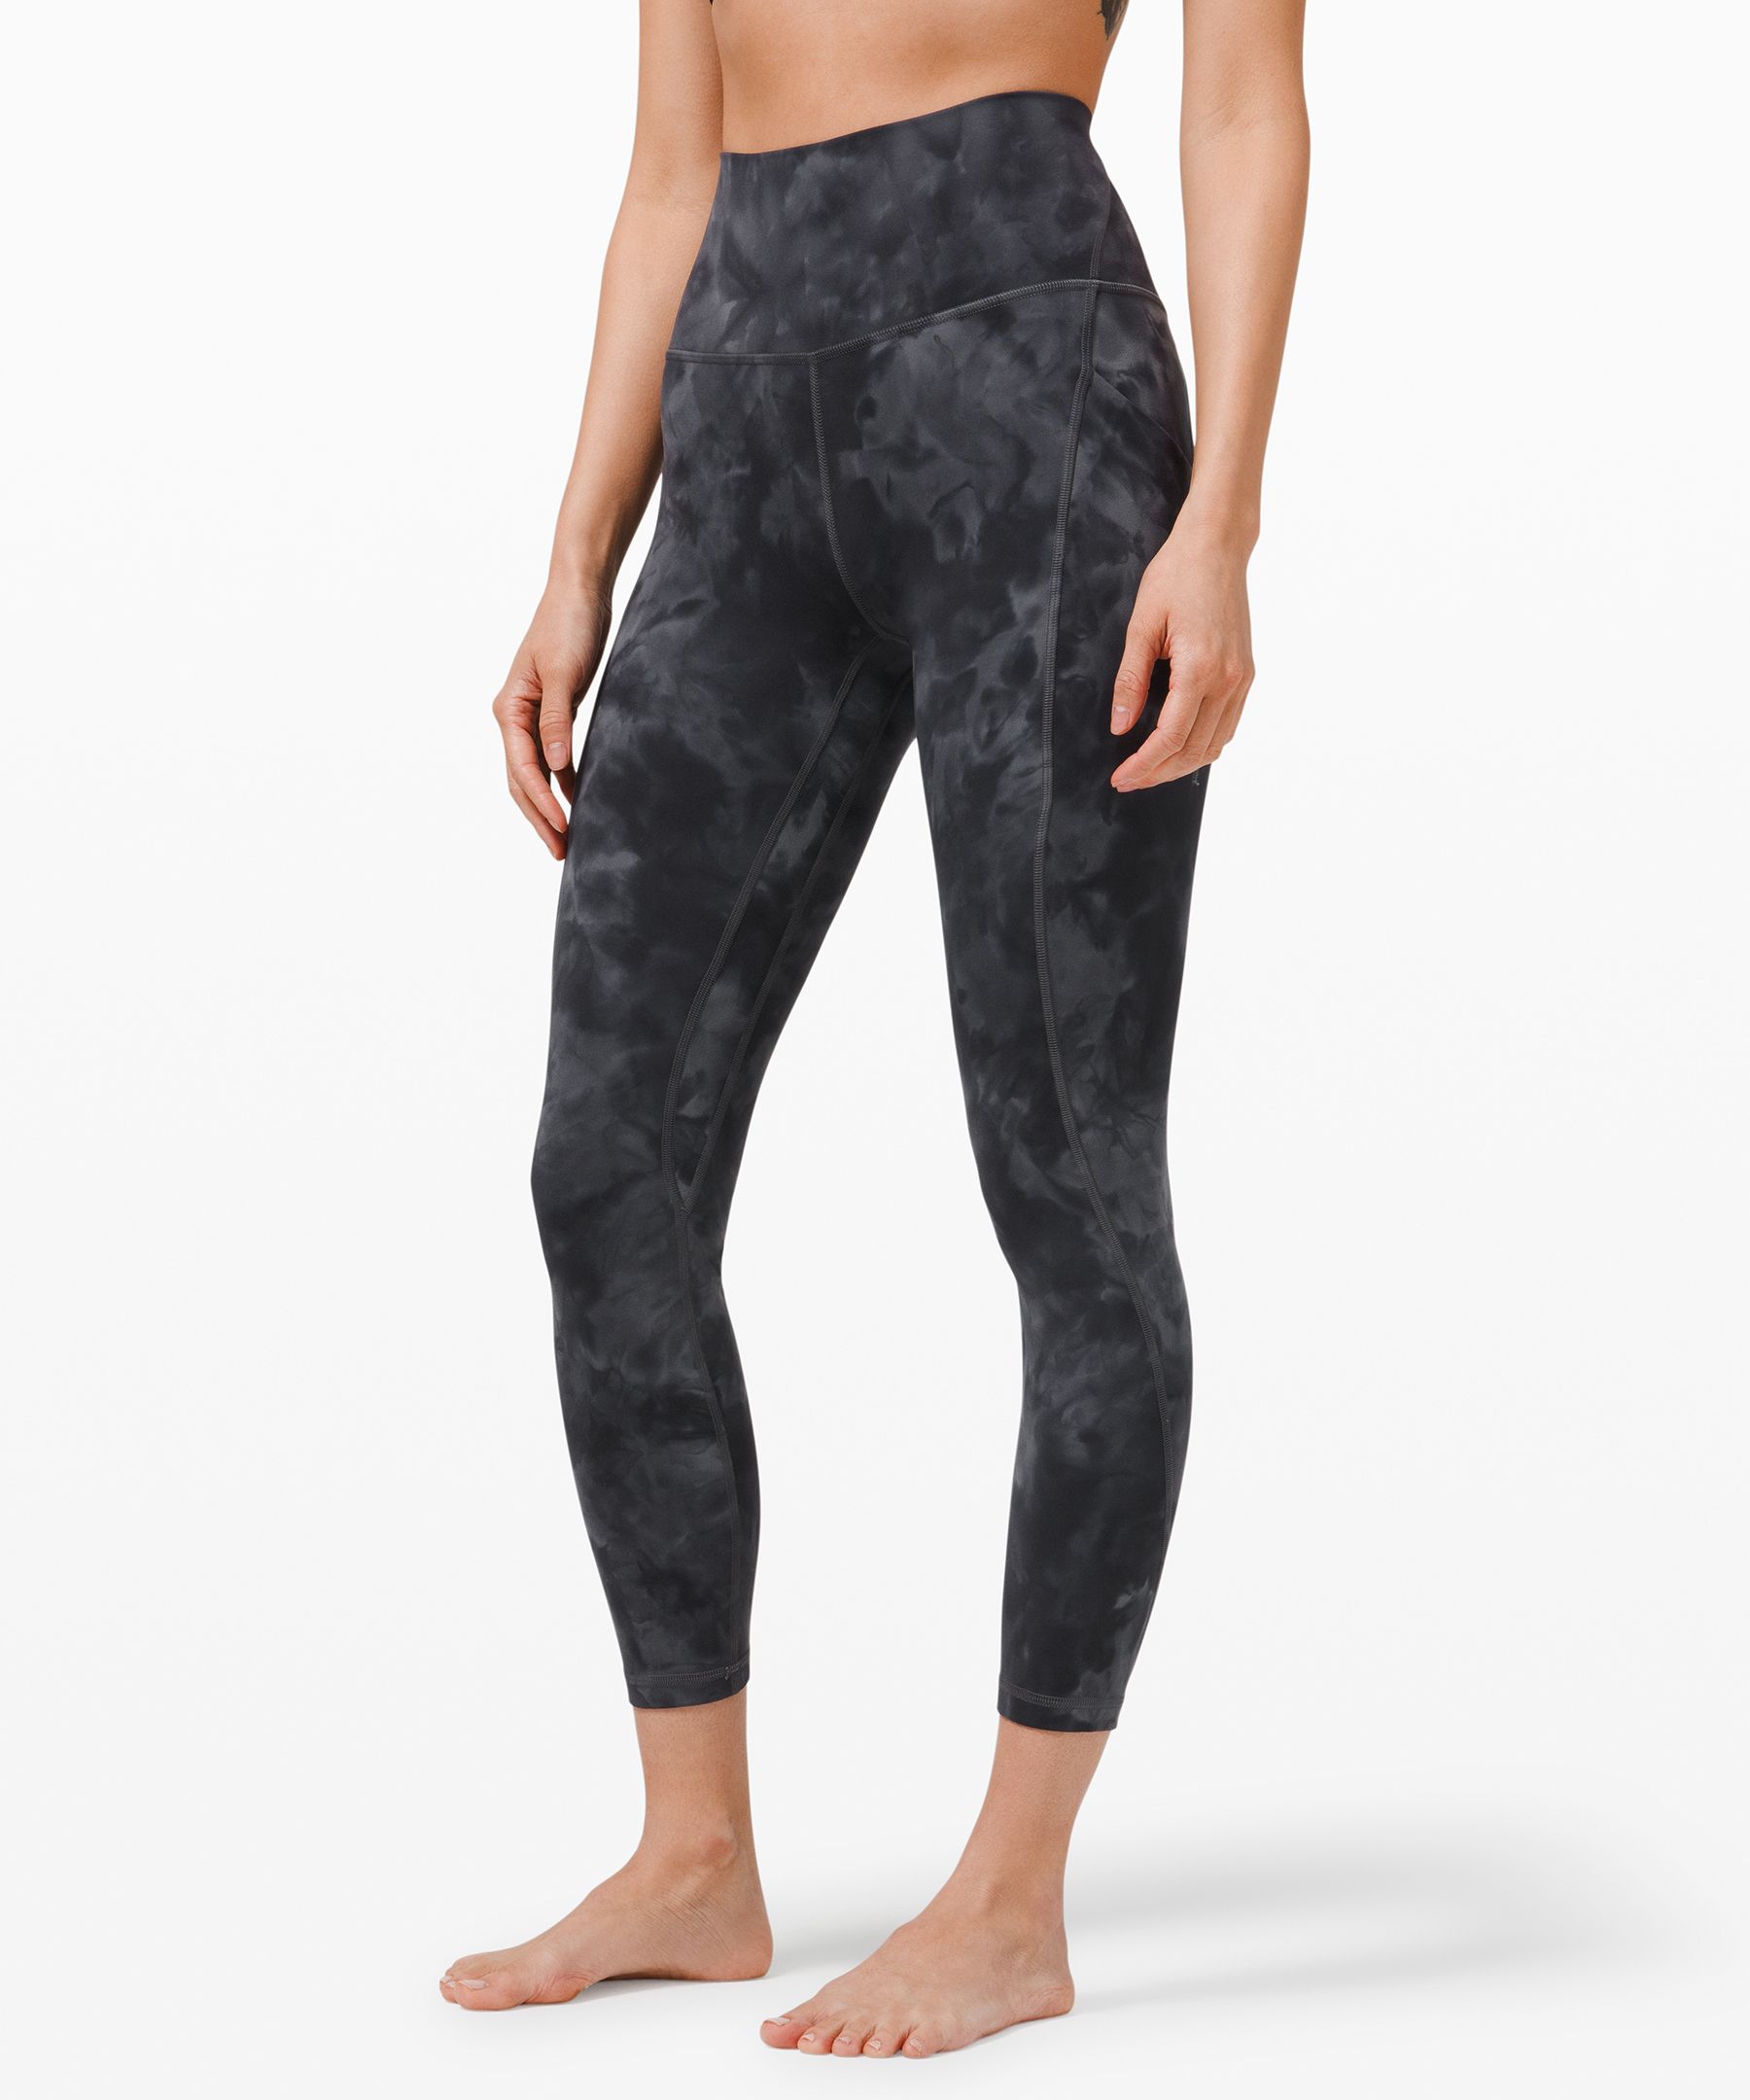 Vitality Cloud Pant Review  Better than the Lululemon Align Pant?